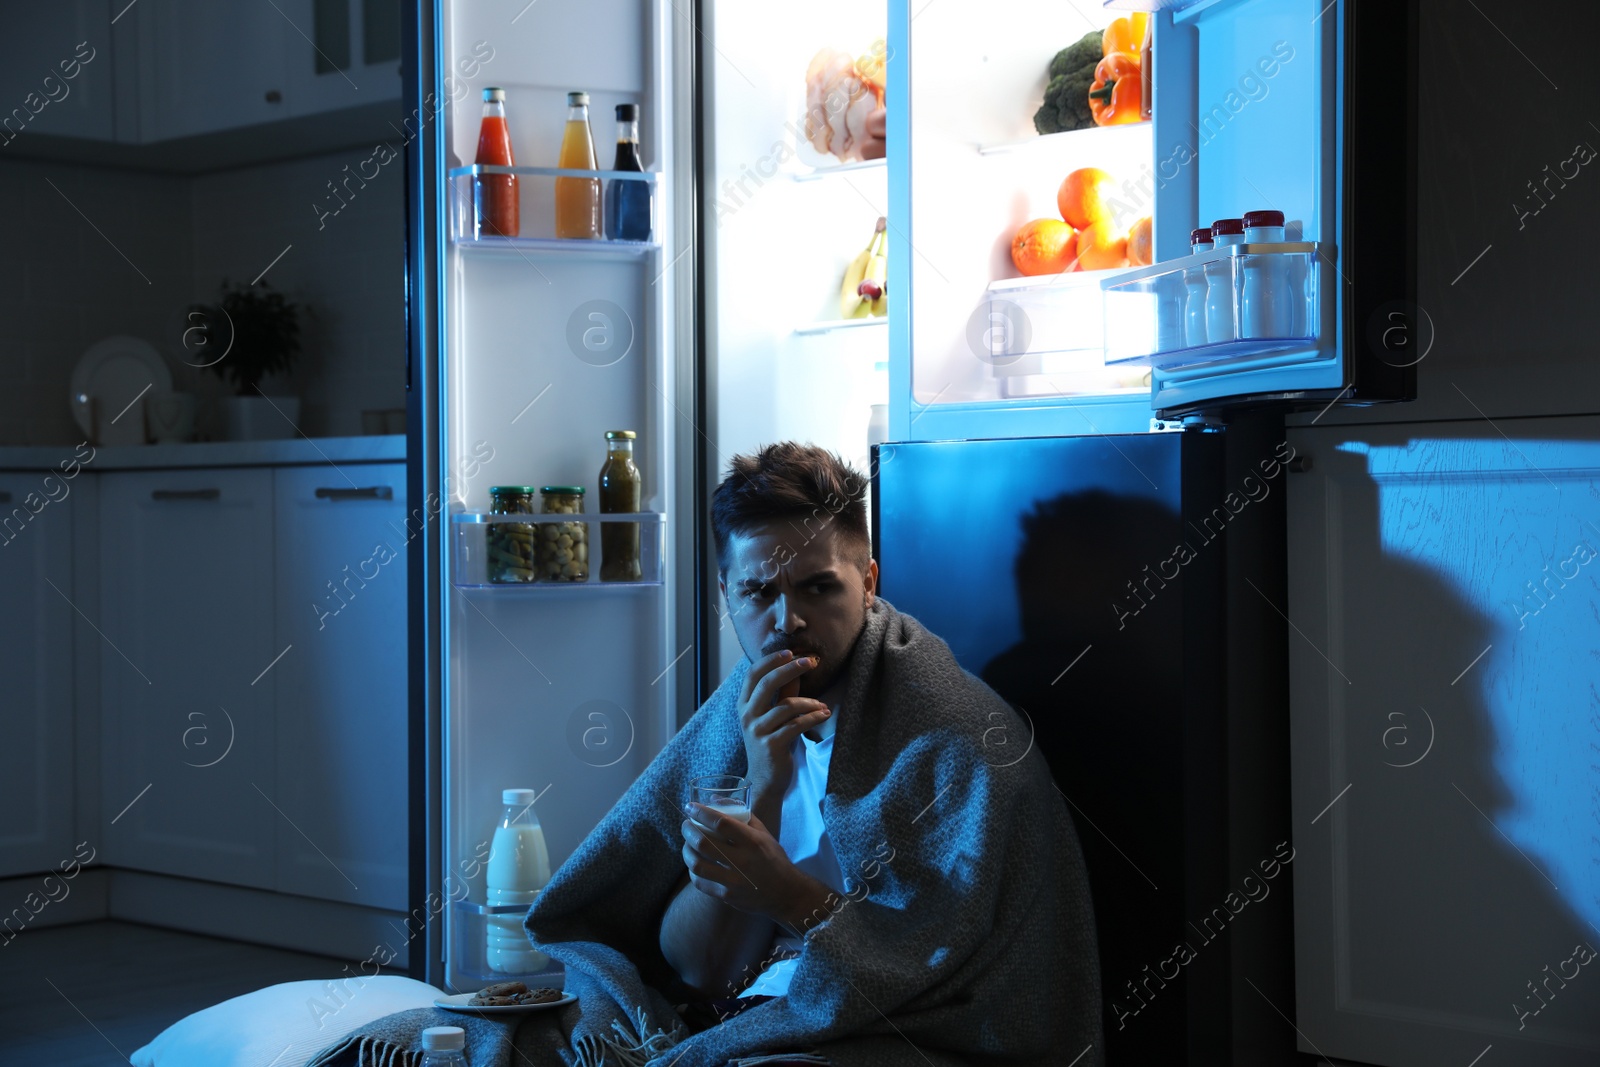 Photo of Young man eating cookies near open refrigerator in kitchen at night